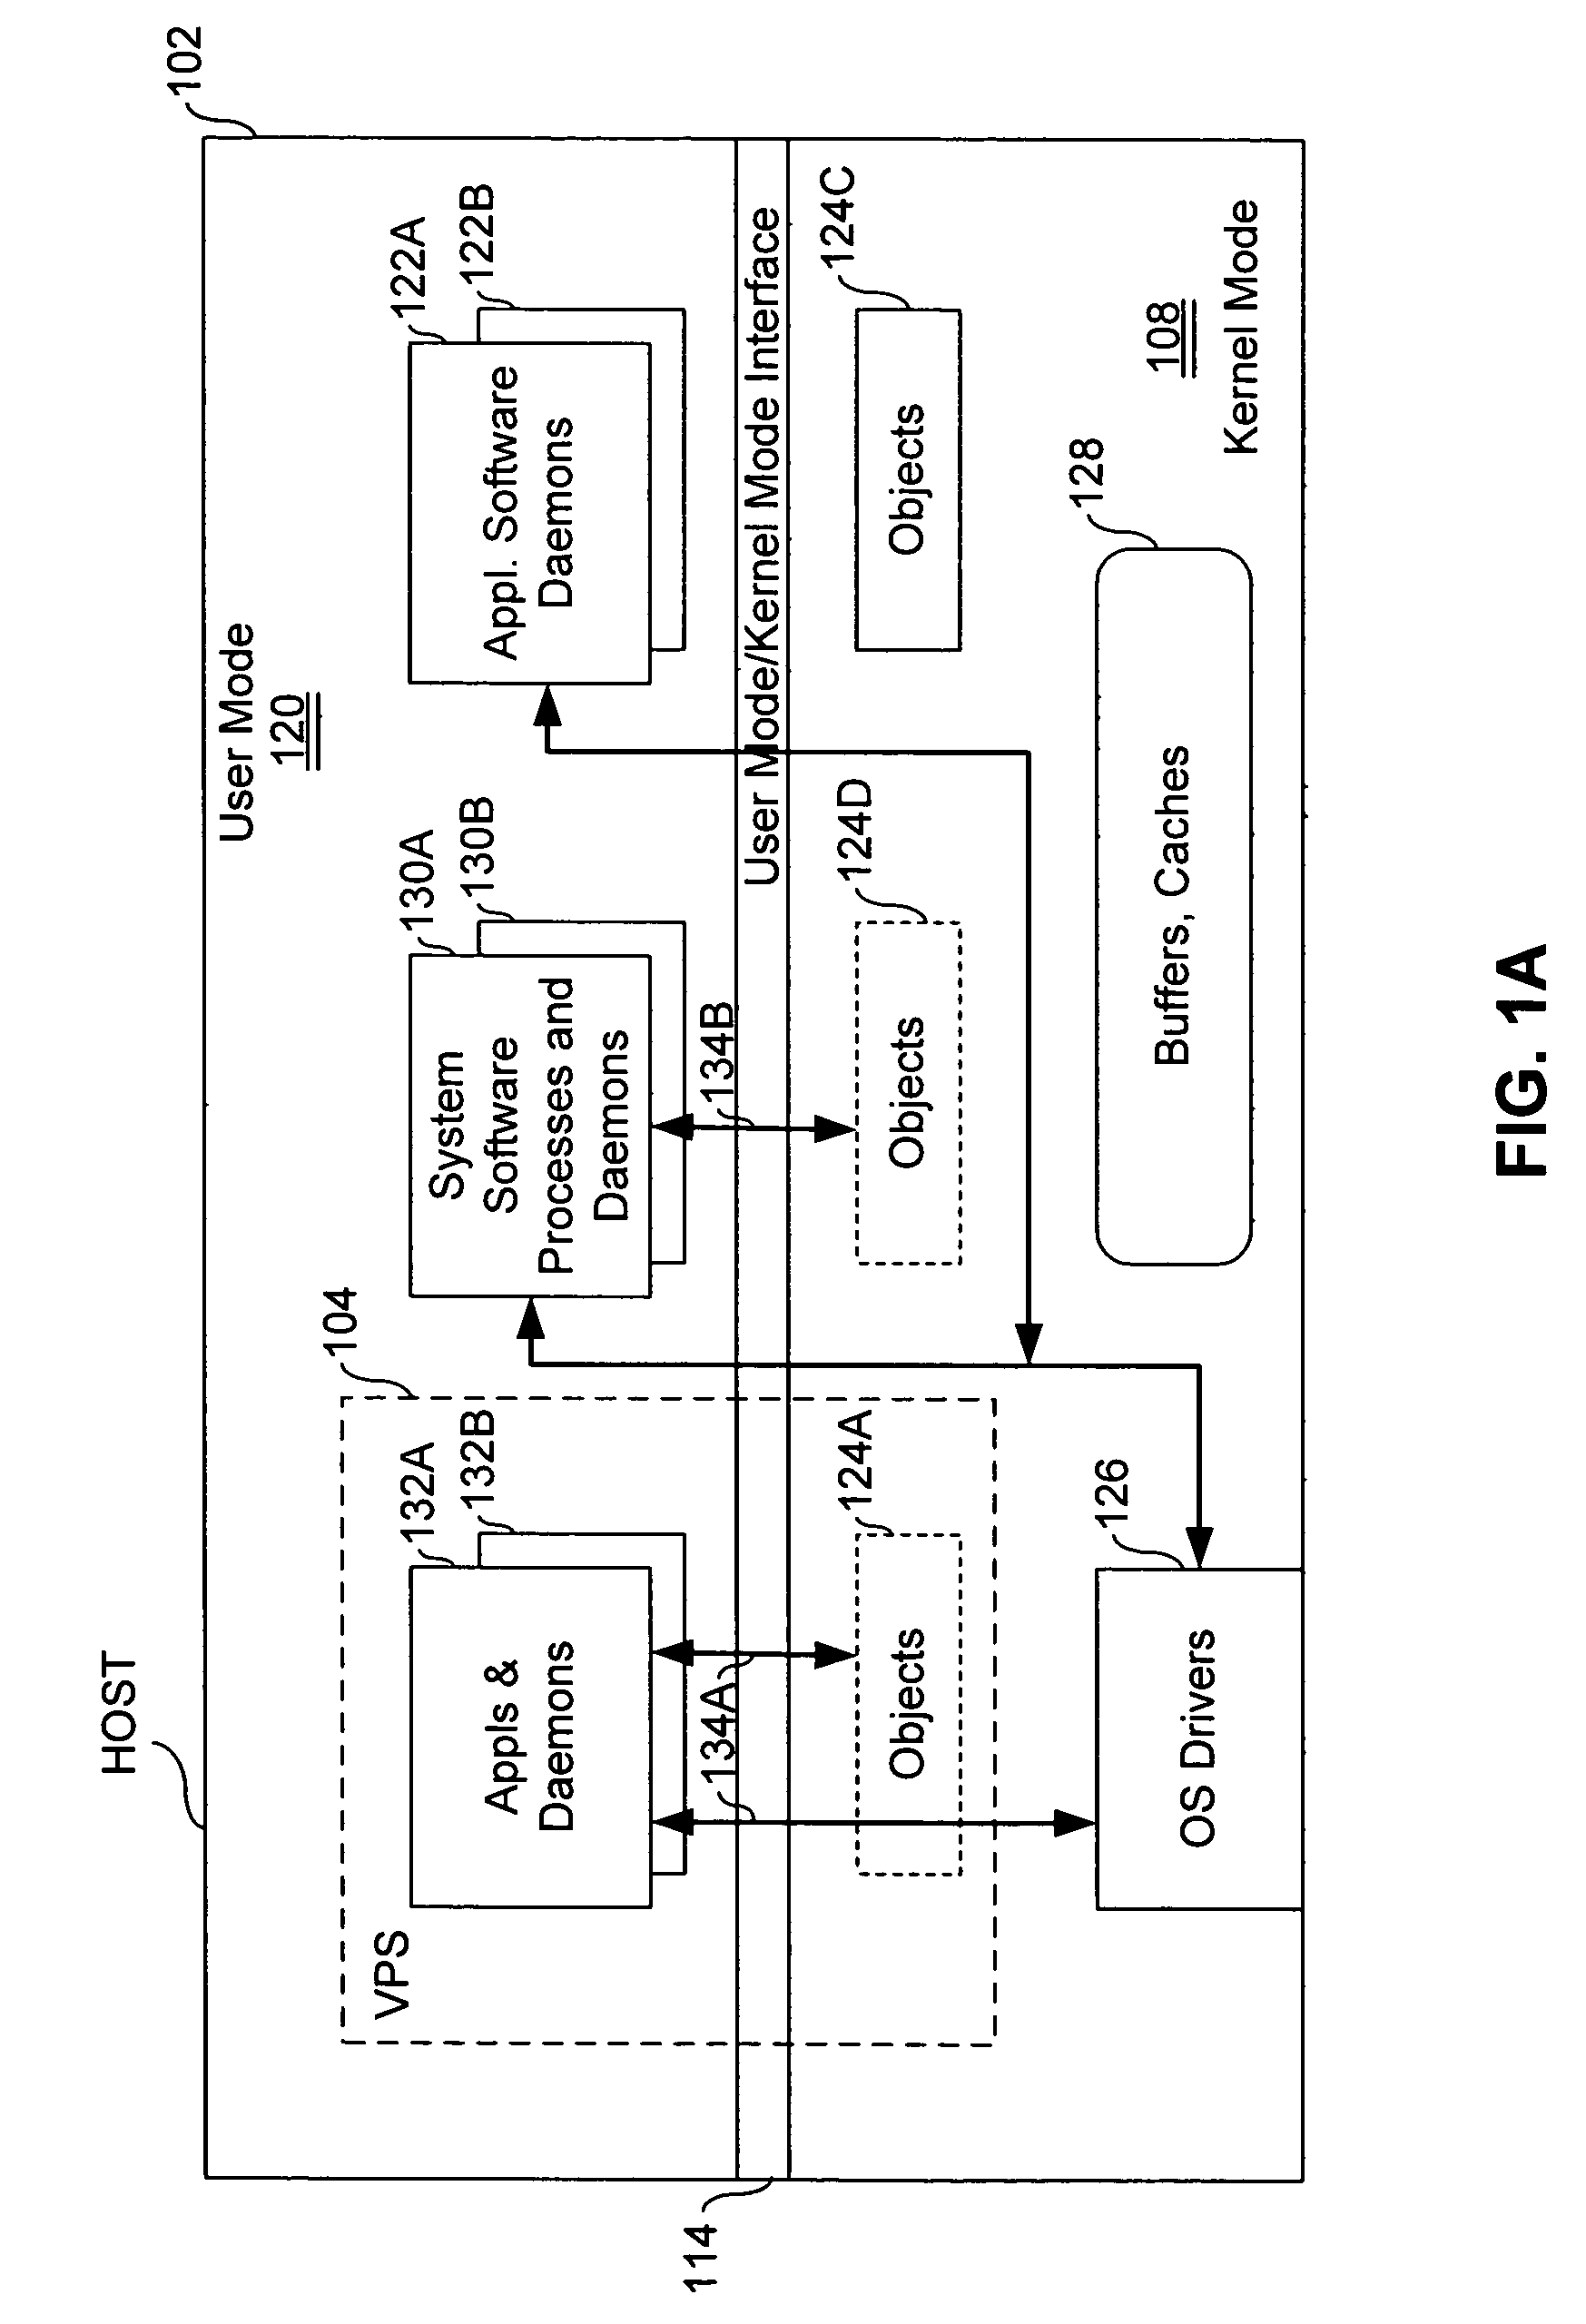 Virtual private server with isolation of system components